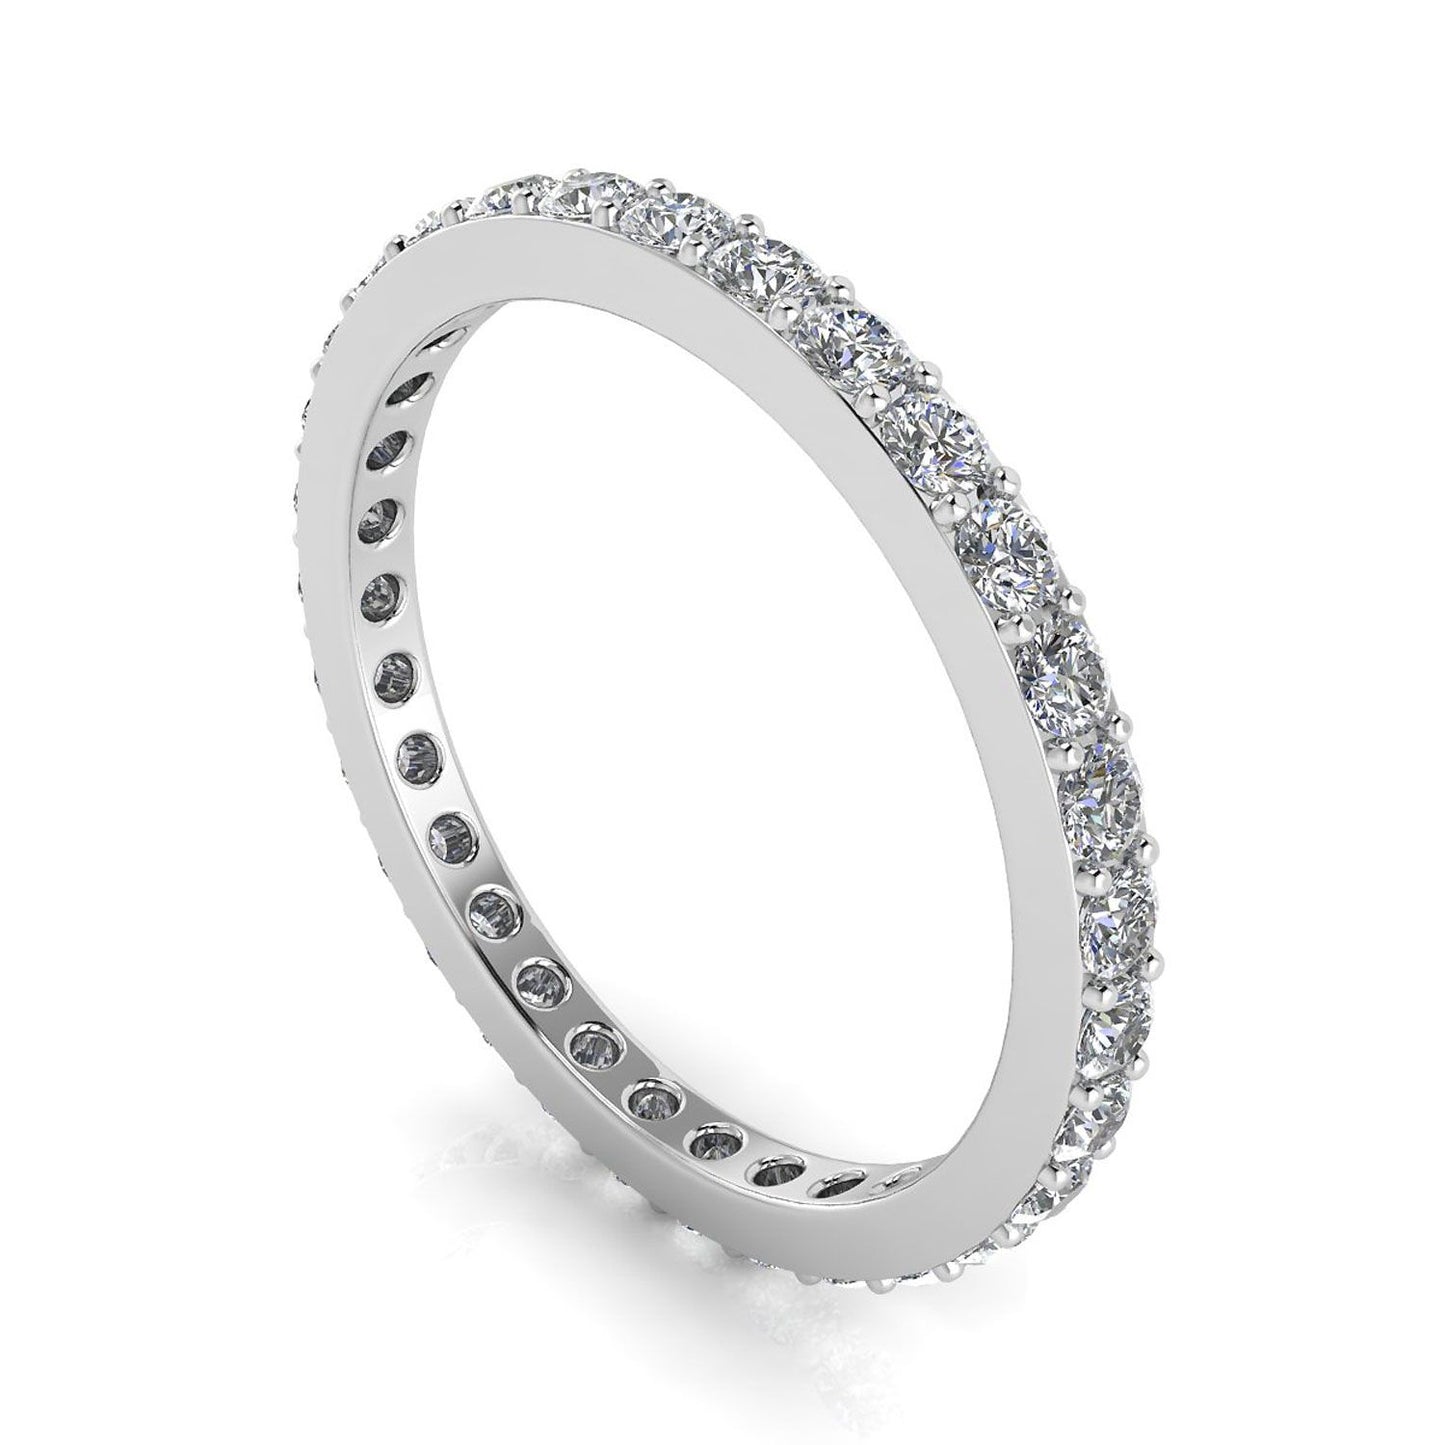 Round Brilliant Cut Diamond Pave Set Eternity Ring In 14k White Gold  (0.5ct. Tw.) Ring Size 8